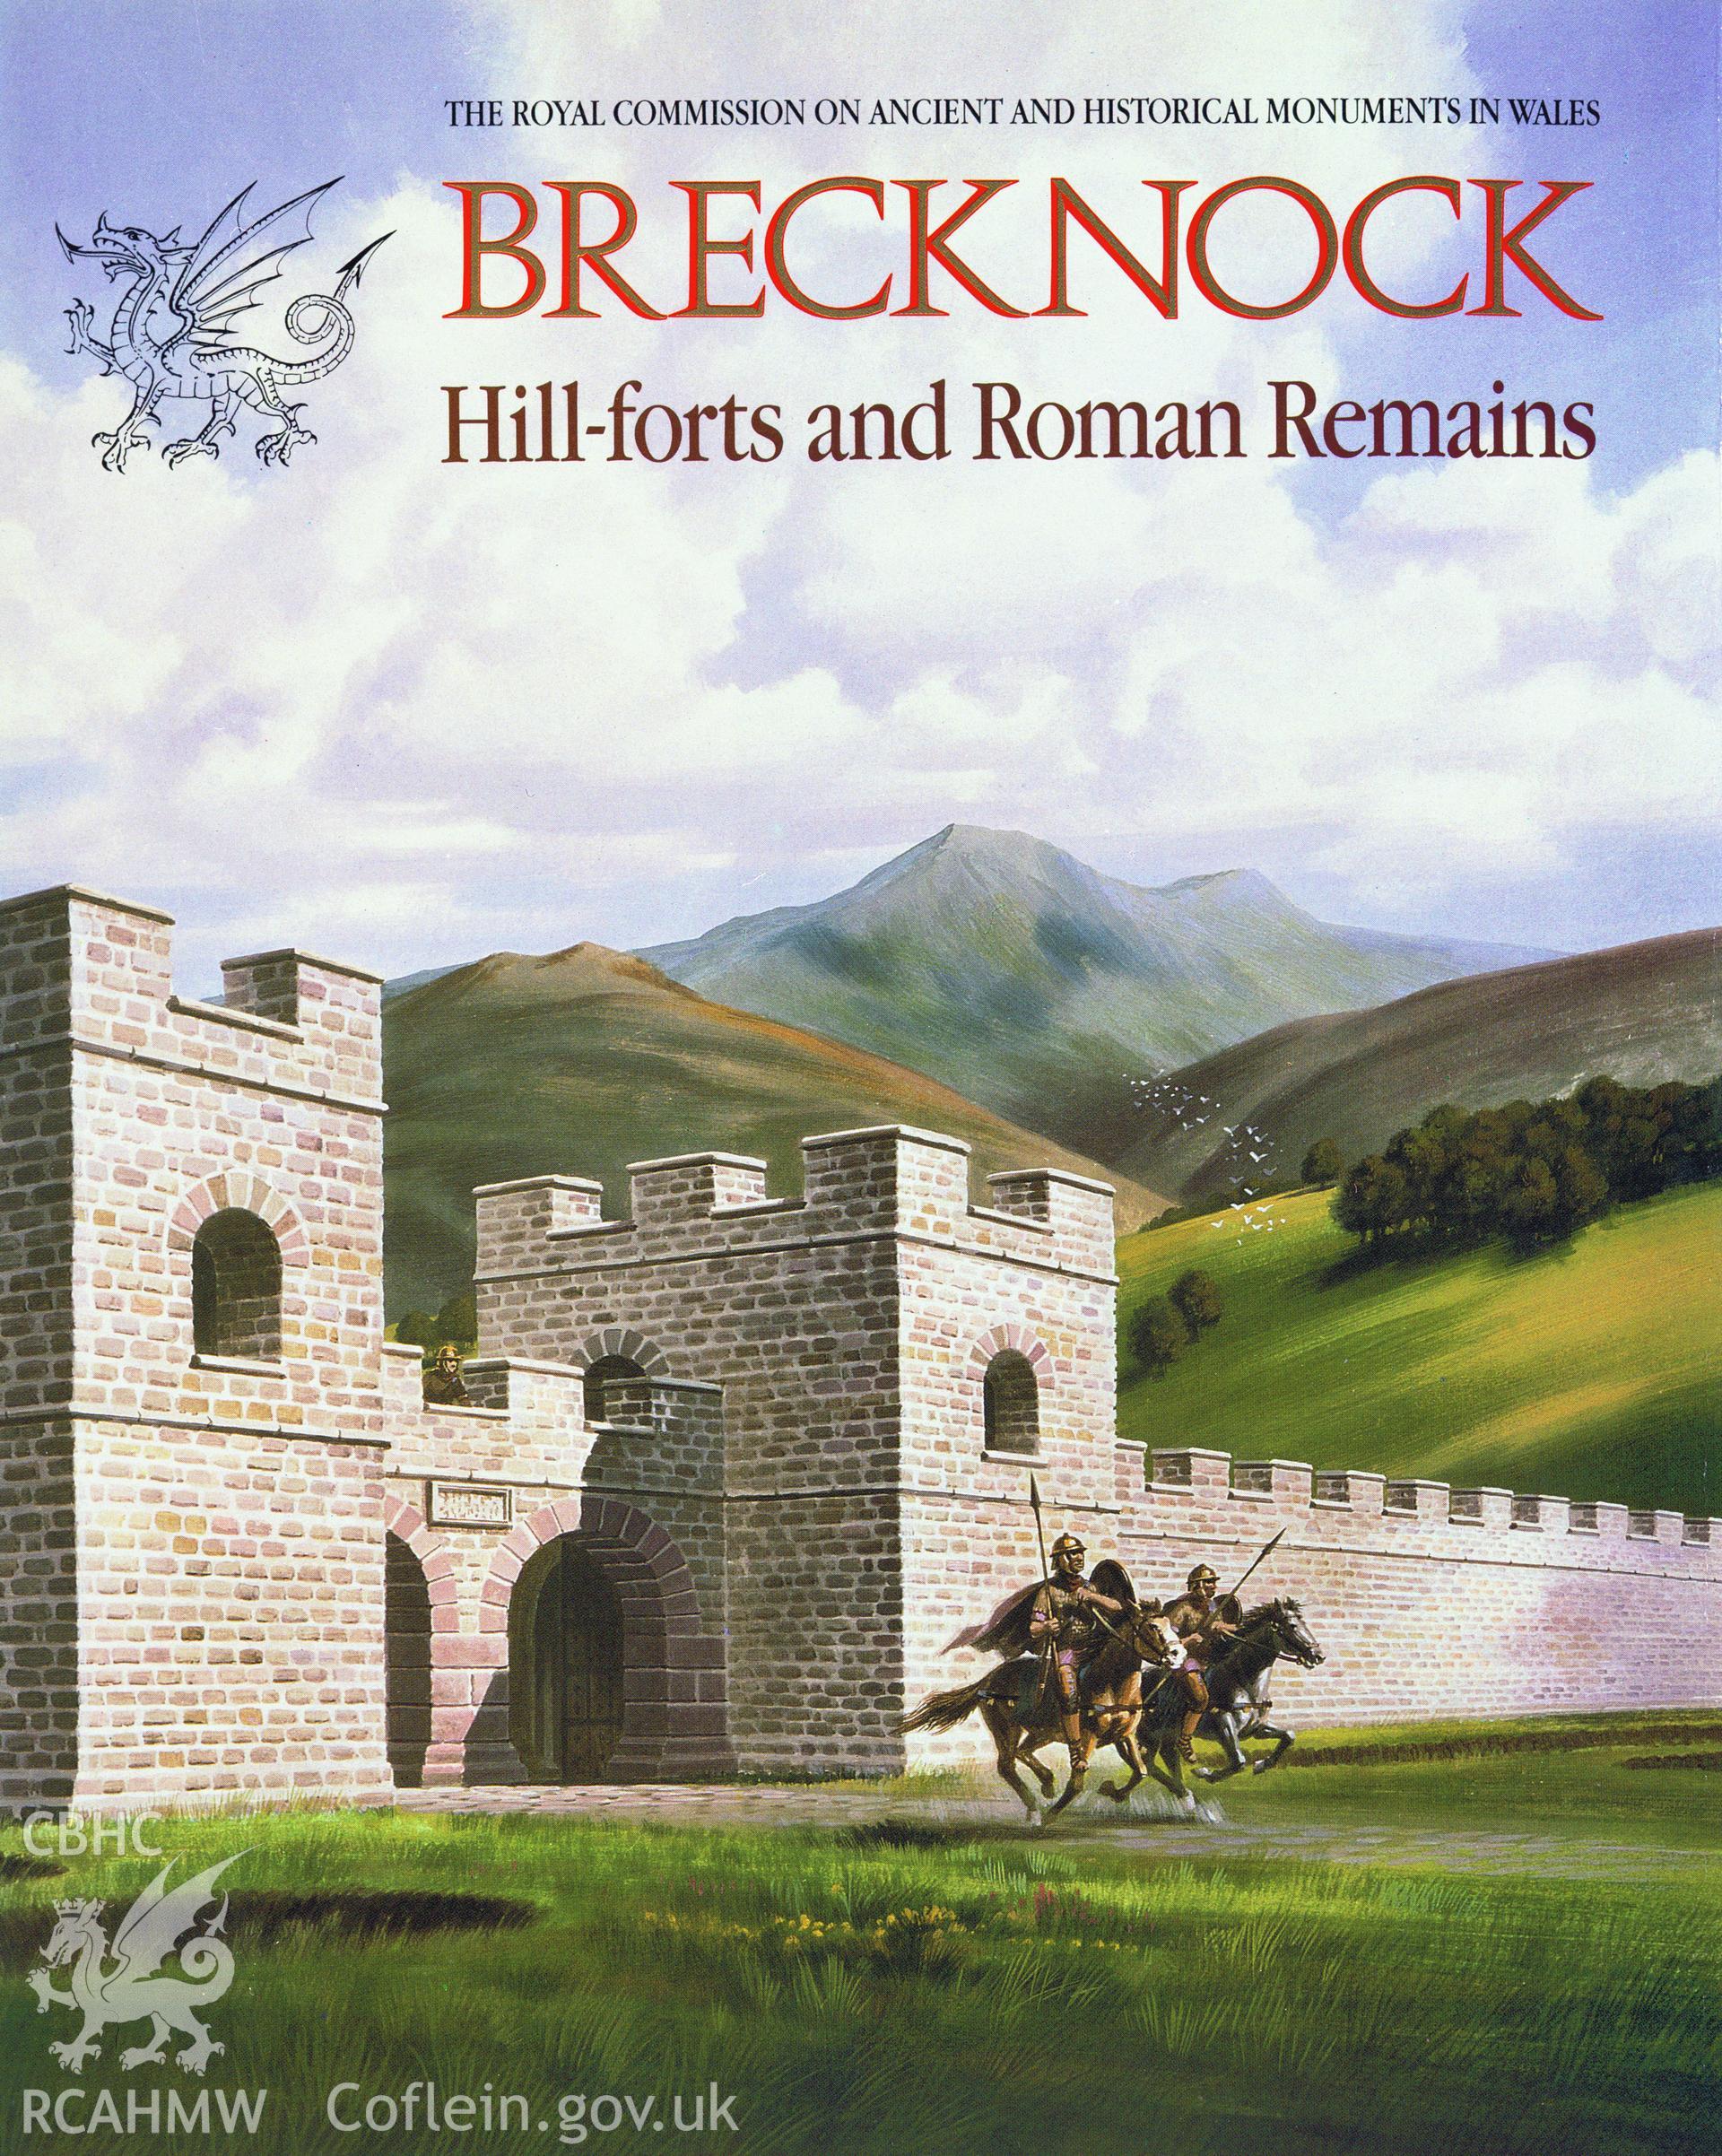 Colour transparency of the cover of the RCAHMW Publication of Brecknock Hillforts and Roman Remains.